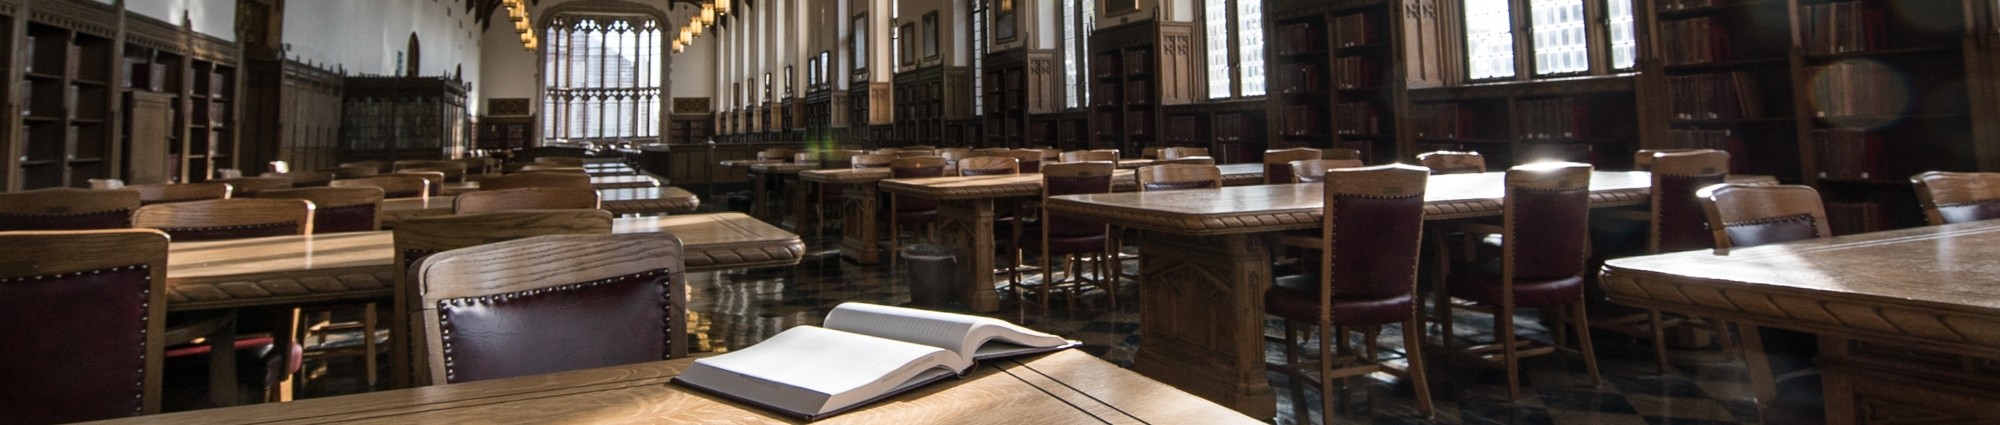 Books and tables in the Great Reading Room in Bizzell Memorial Library.